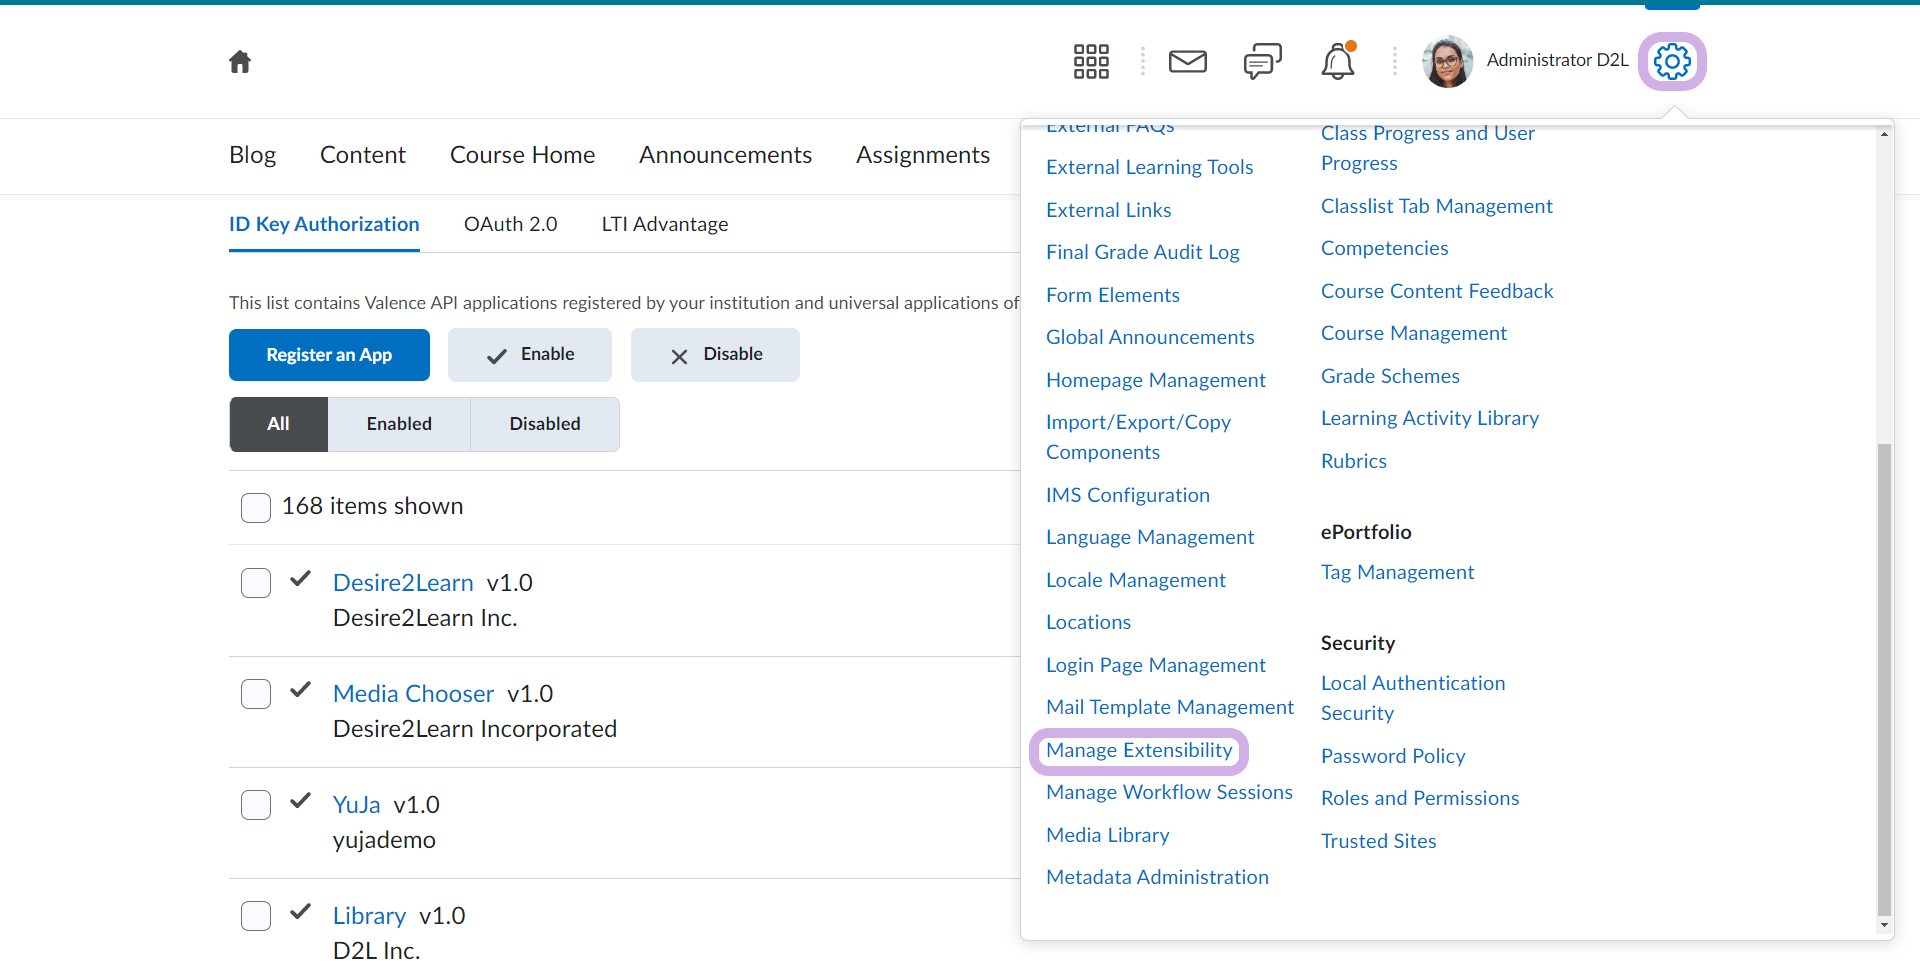 D2L Gear icon selected with Manage extensibility highlighted from the drop-down menu.